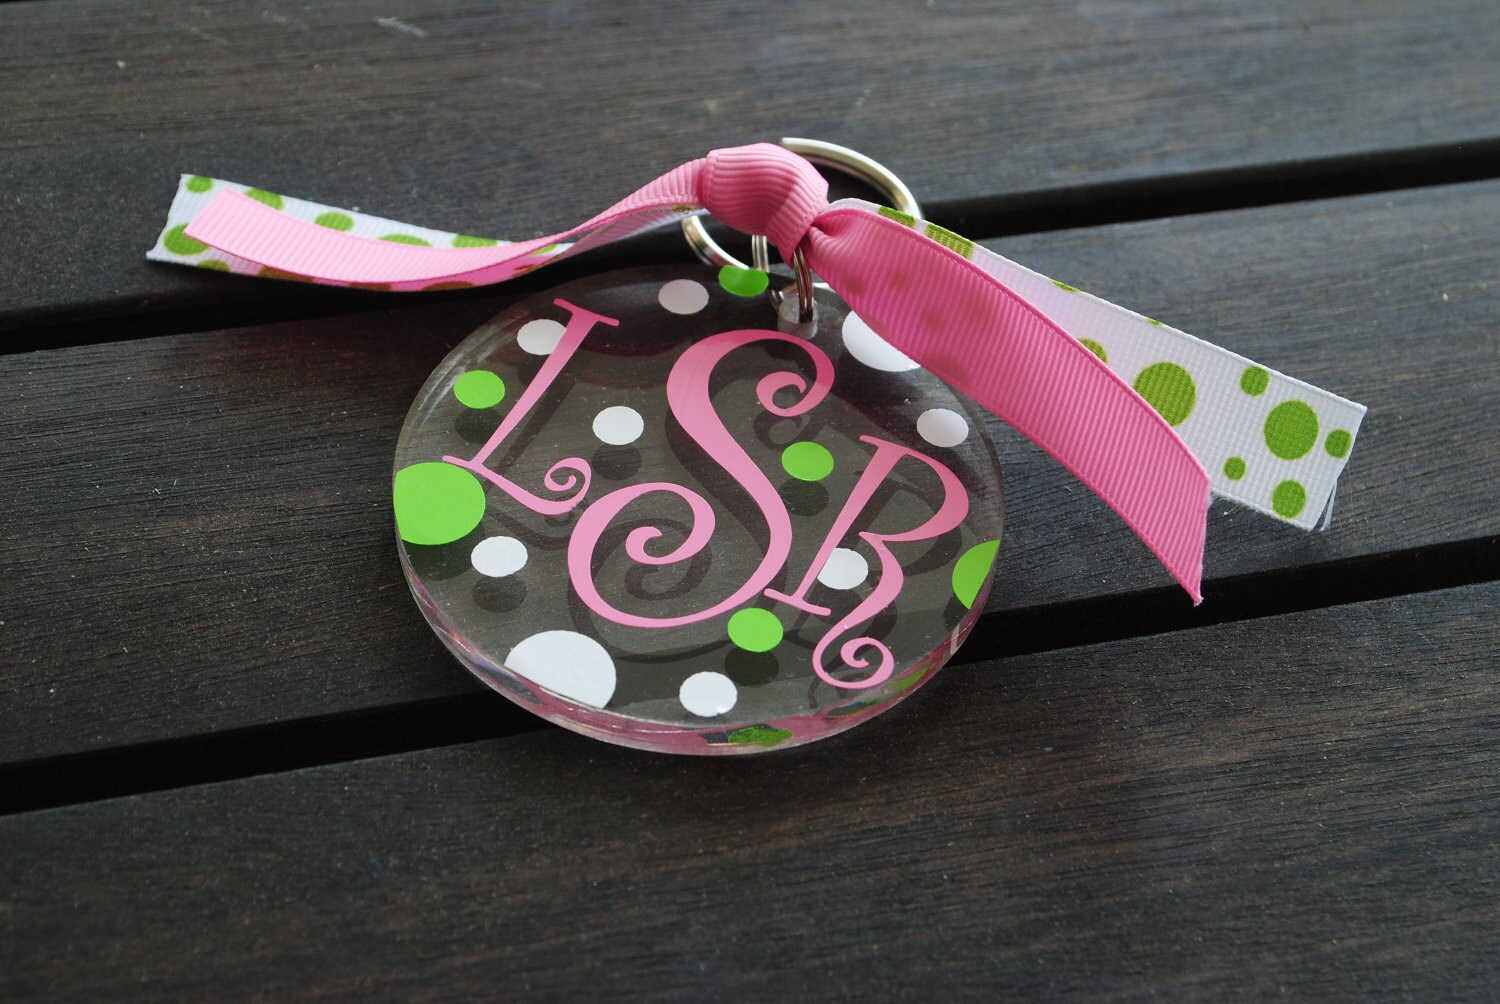 4 BLANK Round Acrylic Key Chain For You To Personalized